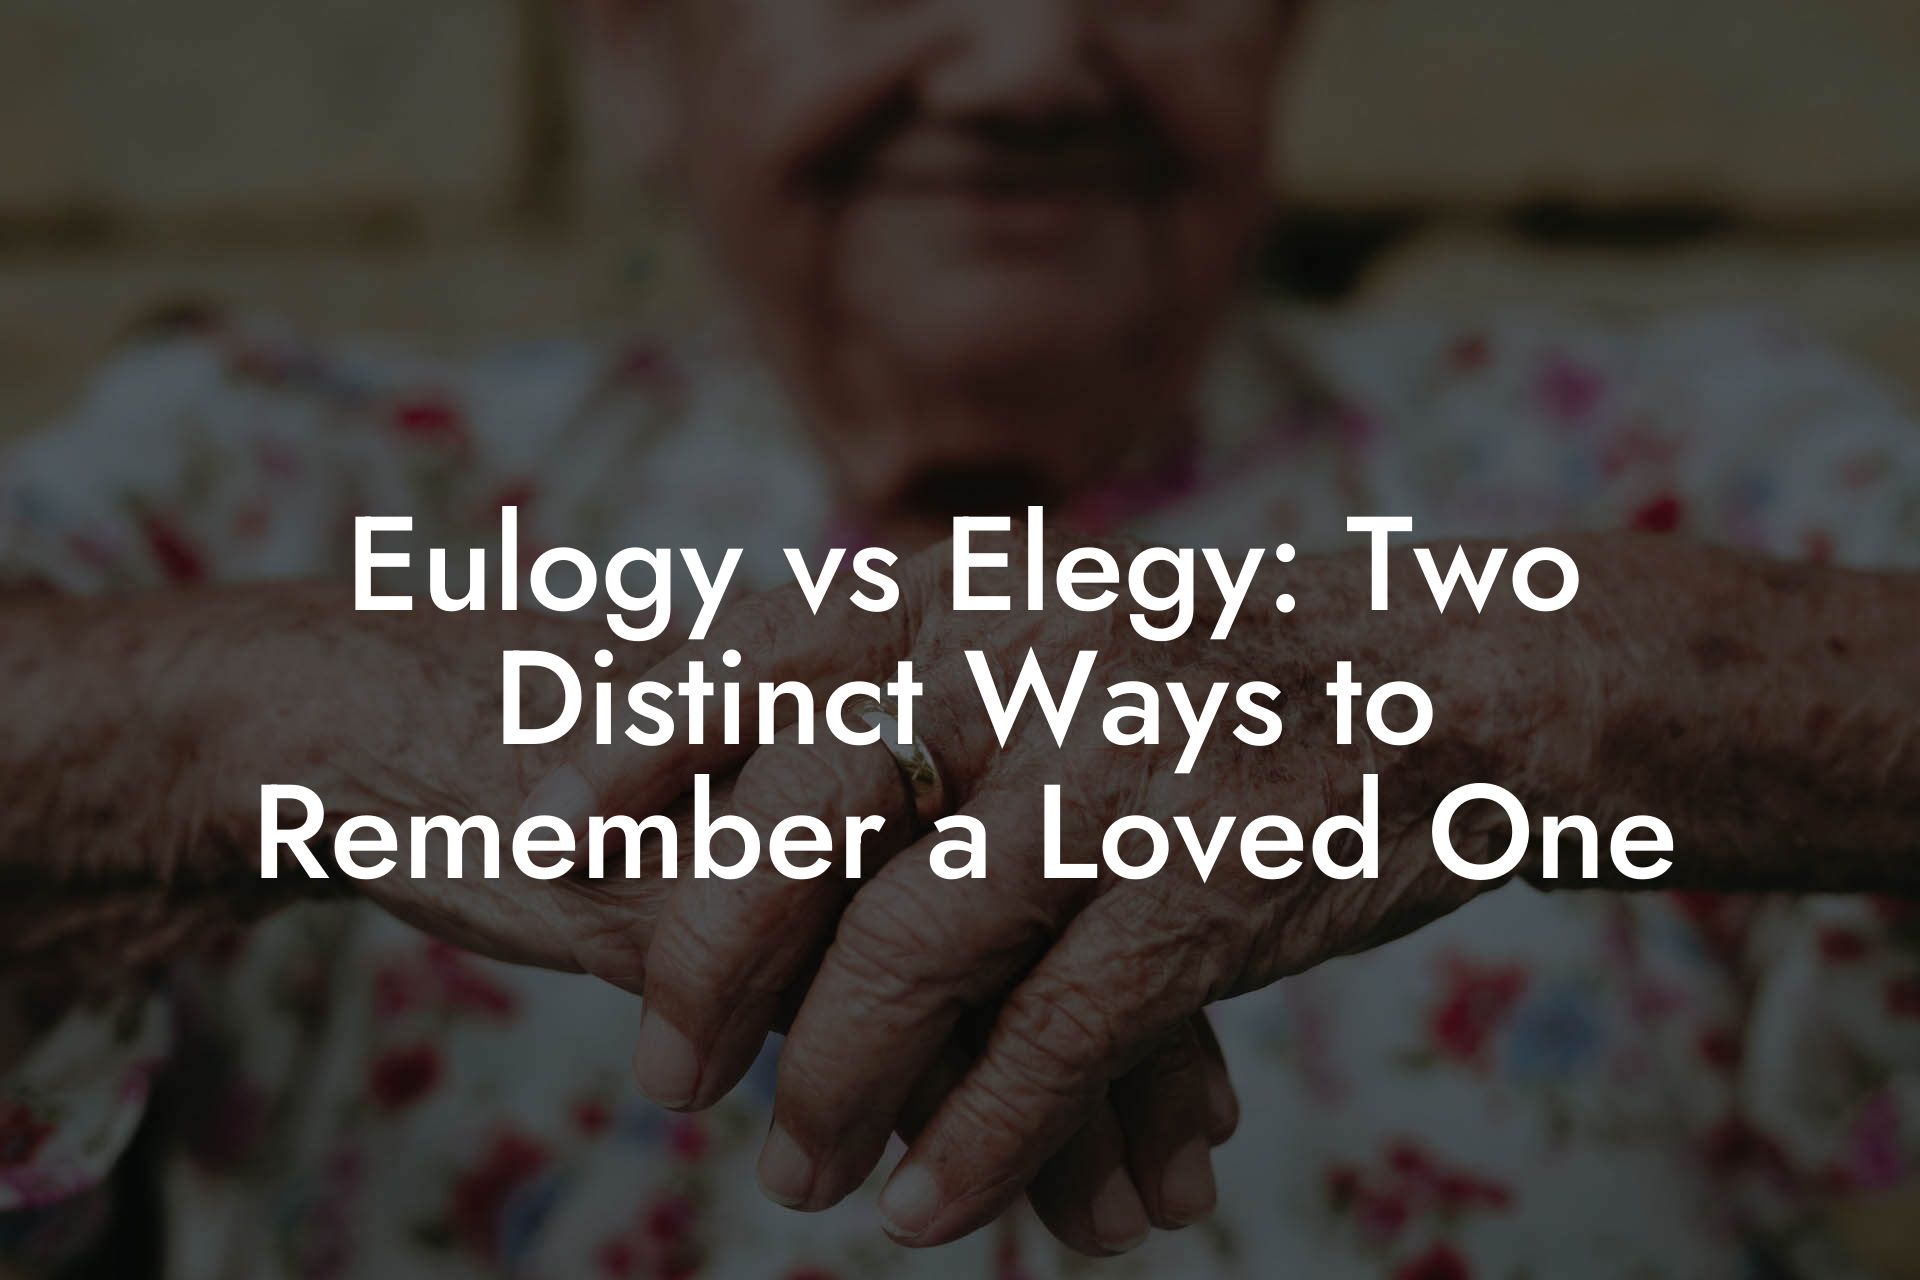 Eulogy vs Elegy: Two Distinct Ways to Remember a Loved One